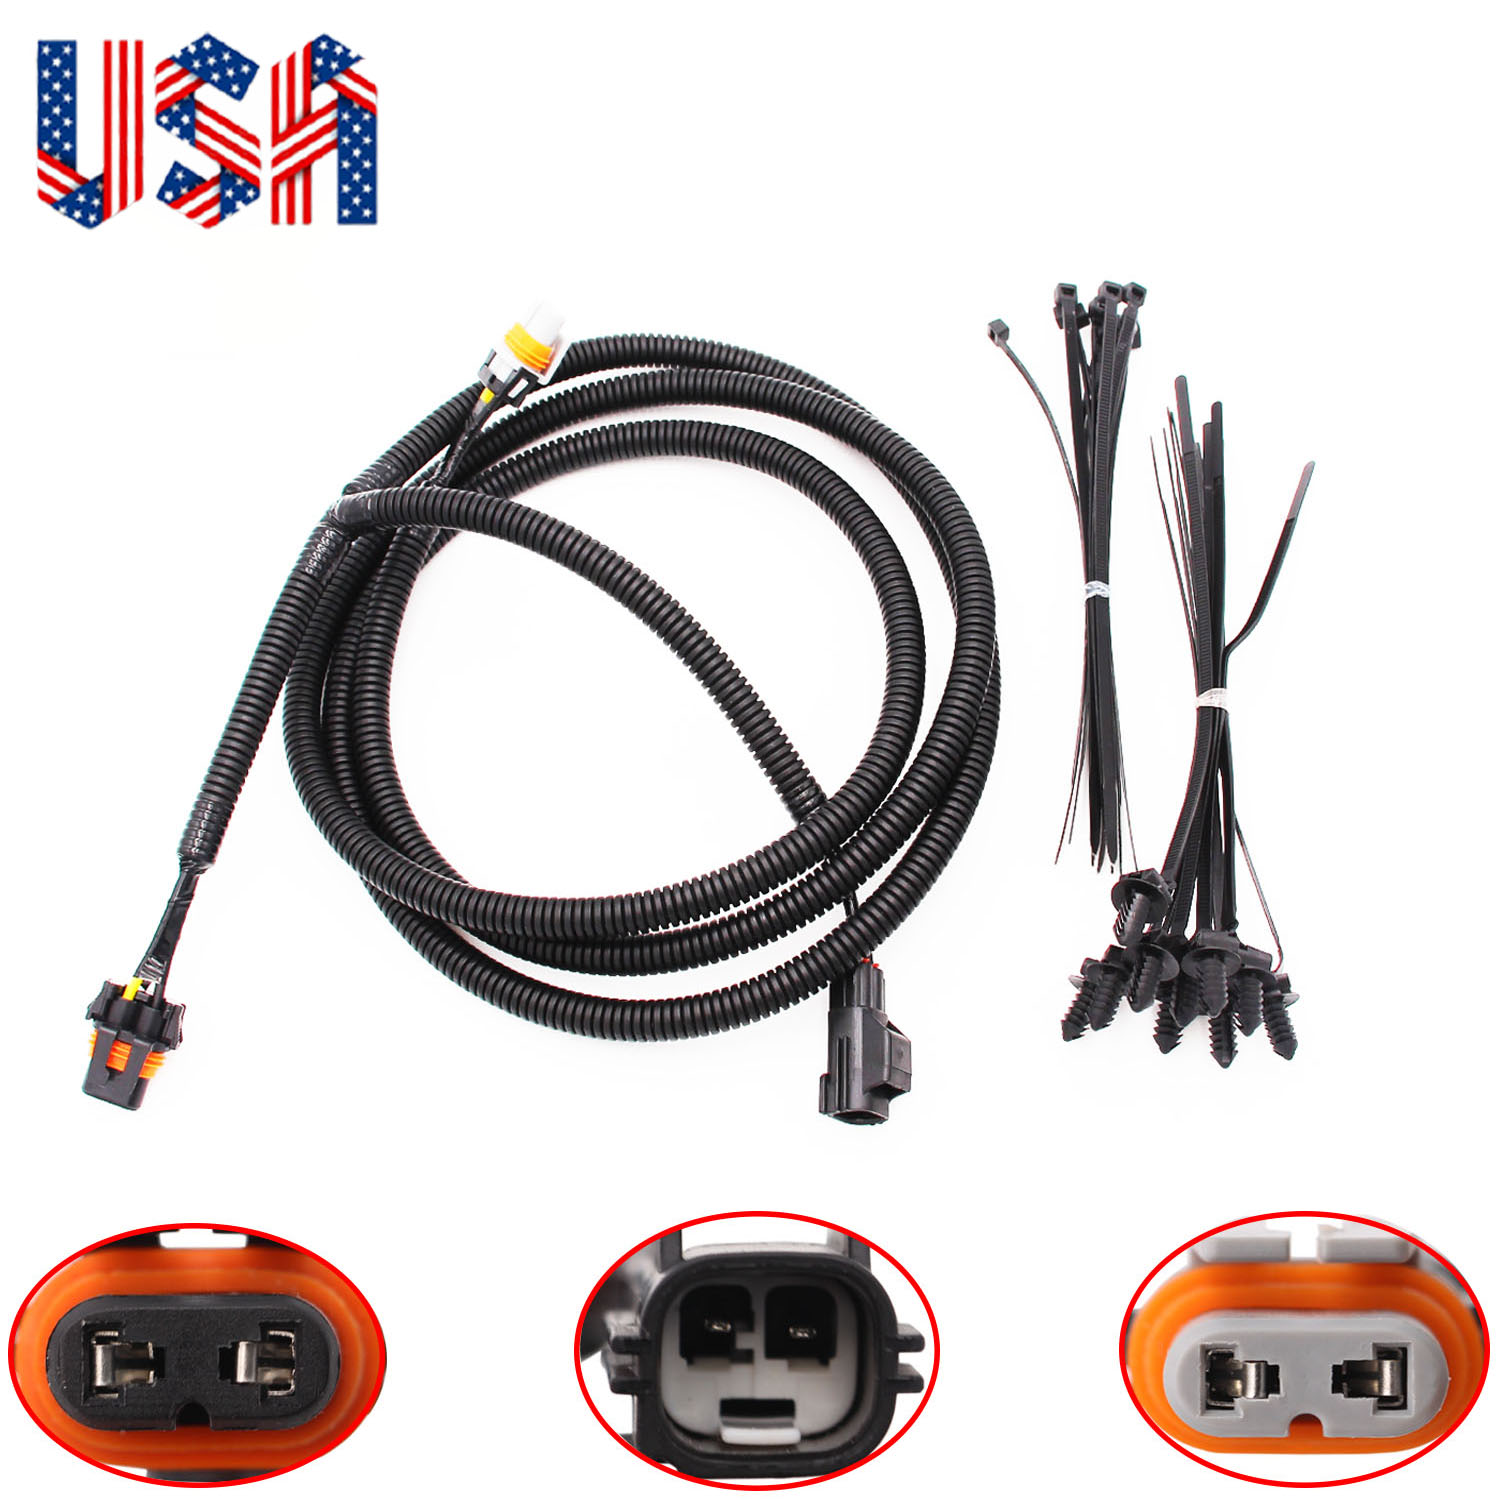 Fog Lamp Jumper Wiring Harness 56045501AC Fit for 2002-2008 Dodge Ram 1500 2500 | eBay 2007 Dodge Ram Tail Light Wiring Harness